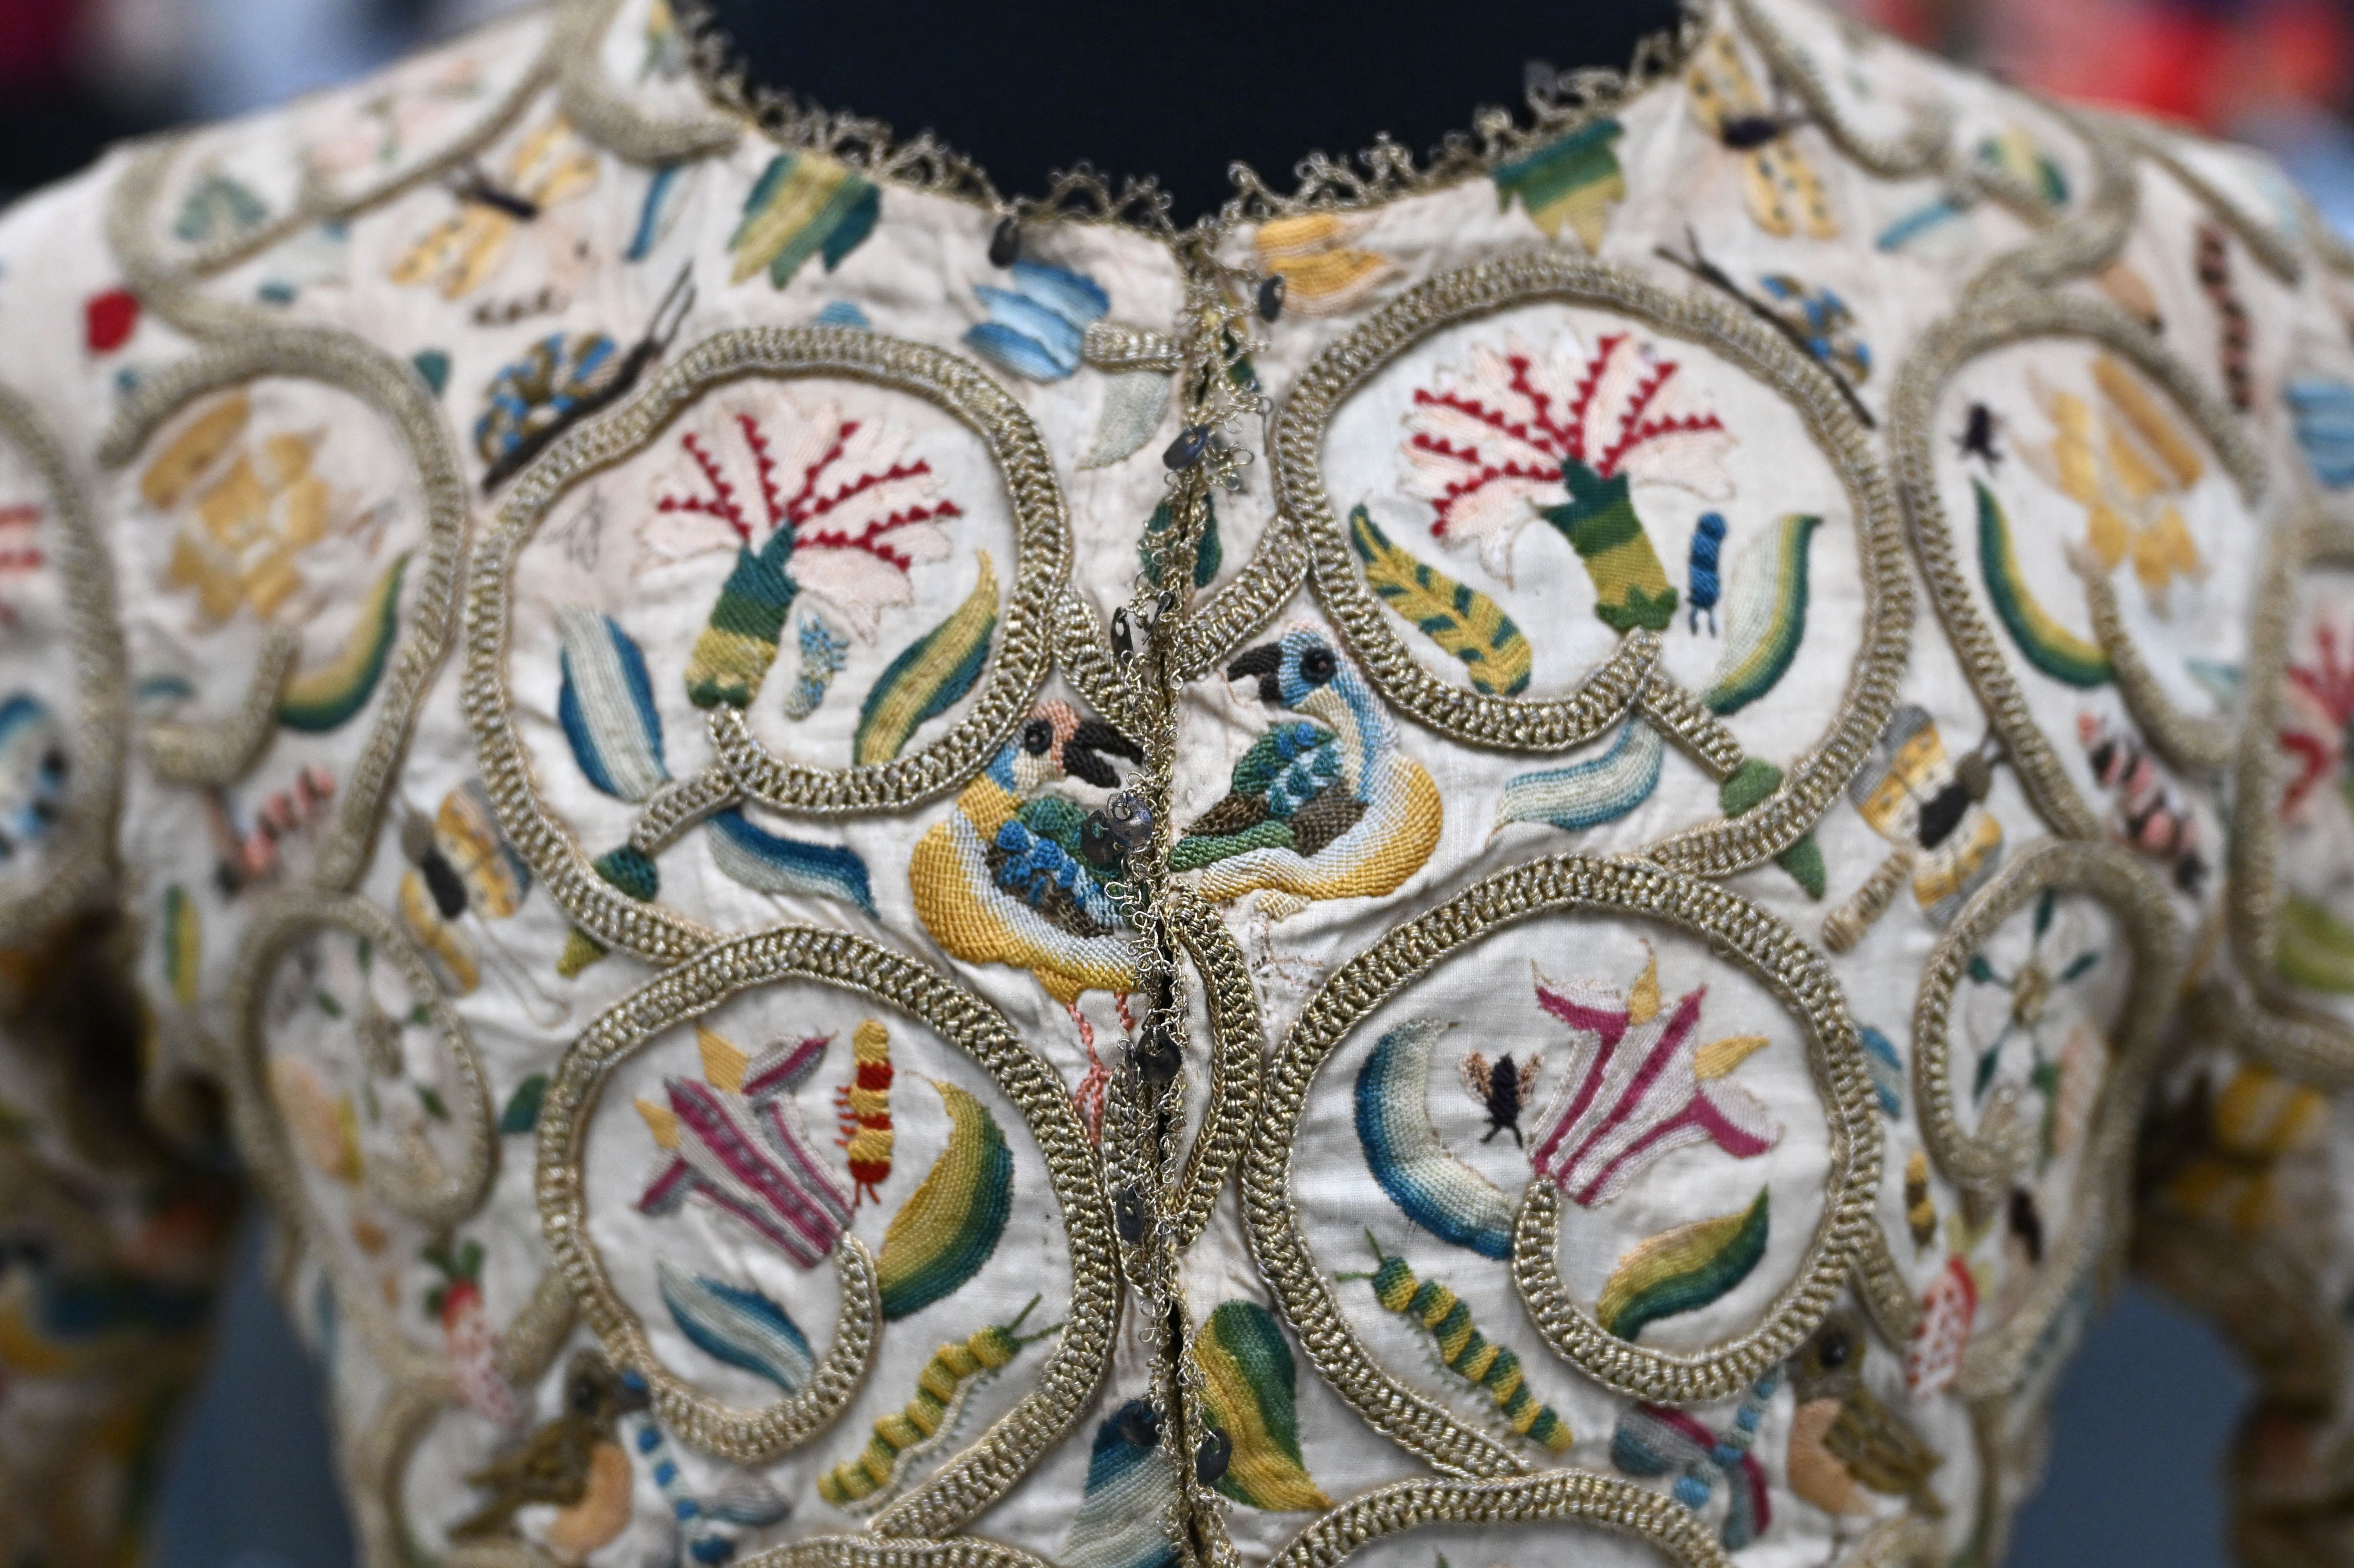 a close-up image of a floral embroidered dress